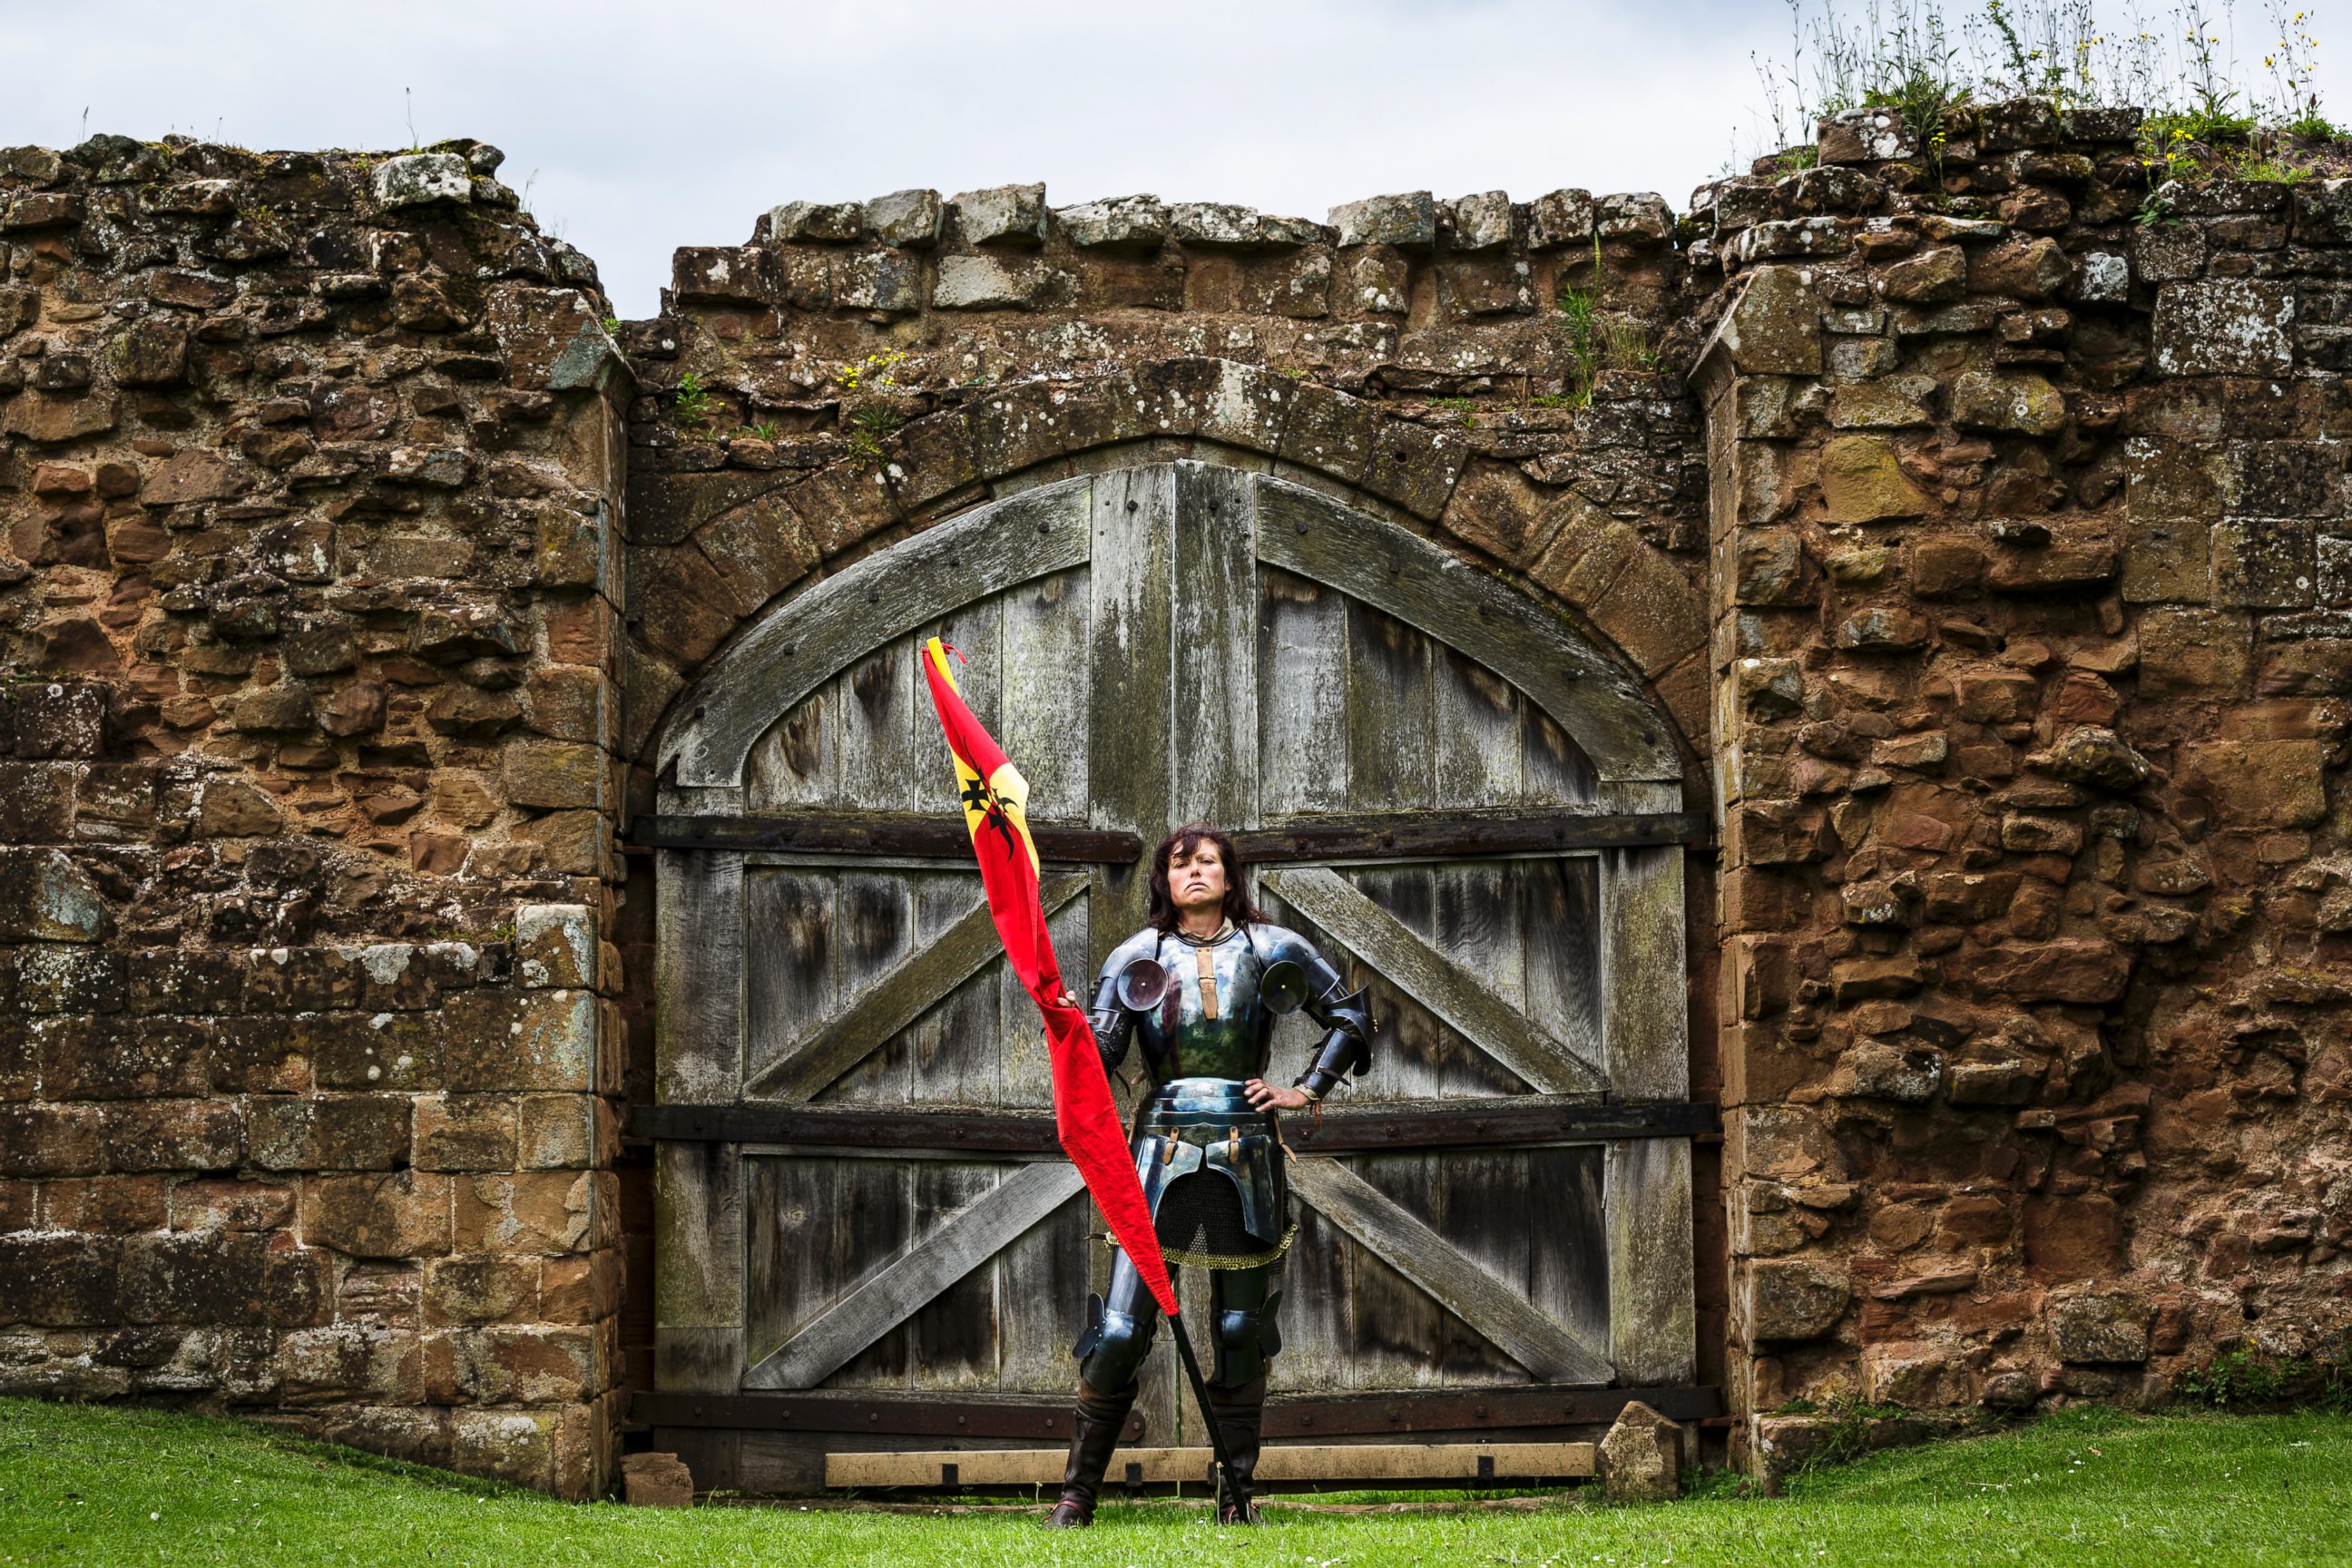 PHOTO: Women will be joining joust tournaments hosted at English Heritage castles in the UK for the first time this summer.  A female Jouster at Kenilworth Castle, Warwickshire, UK.